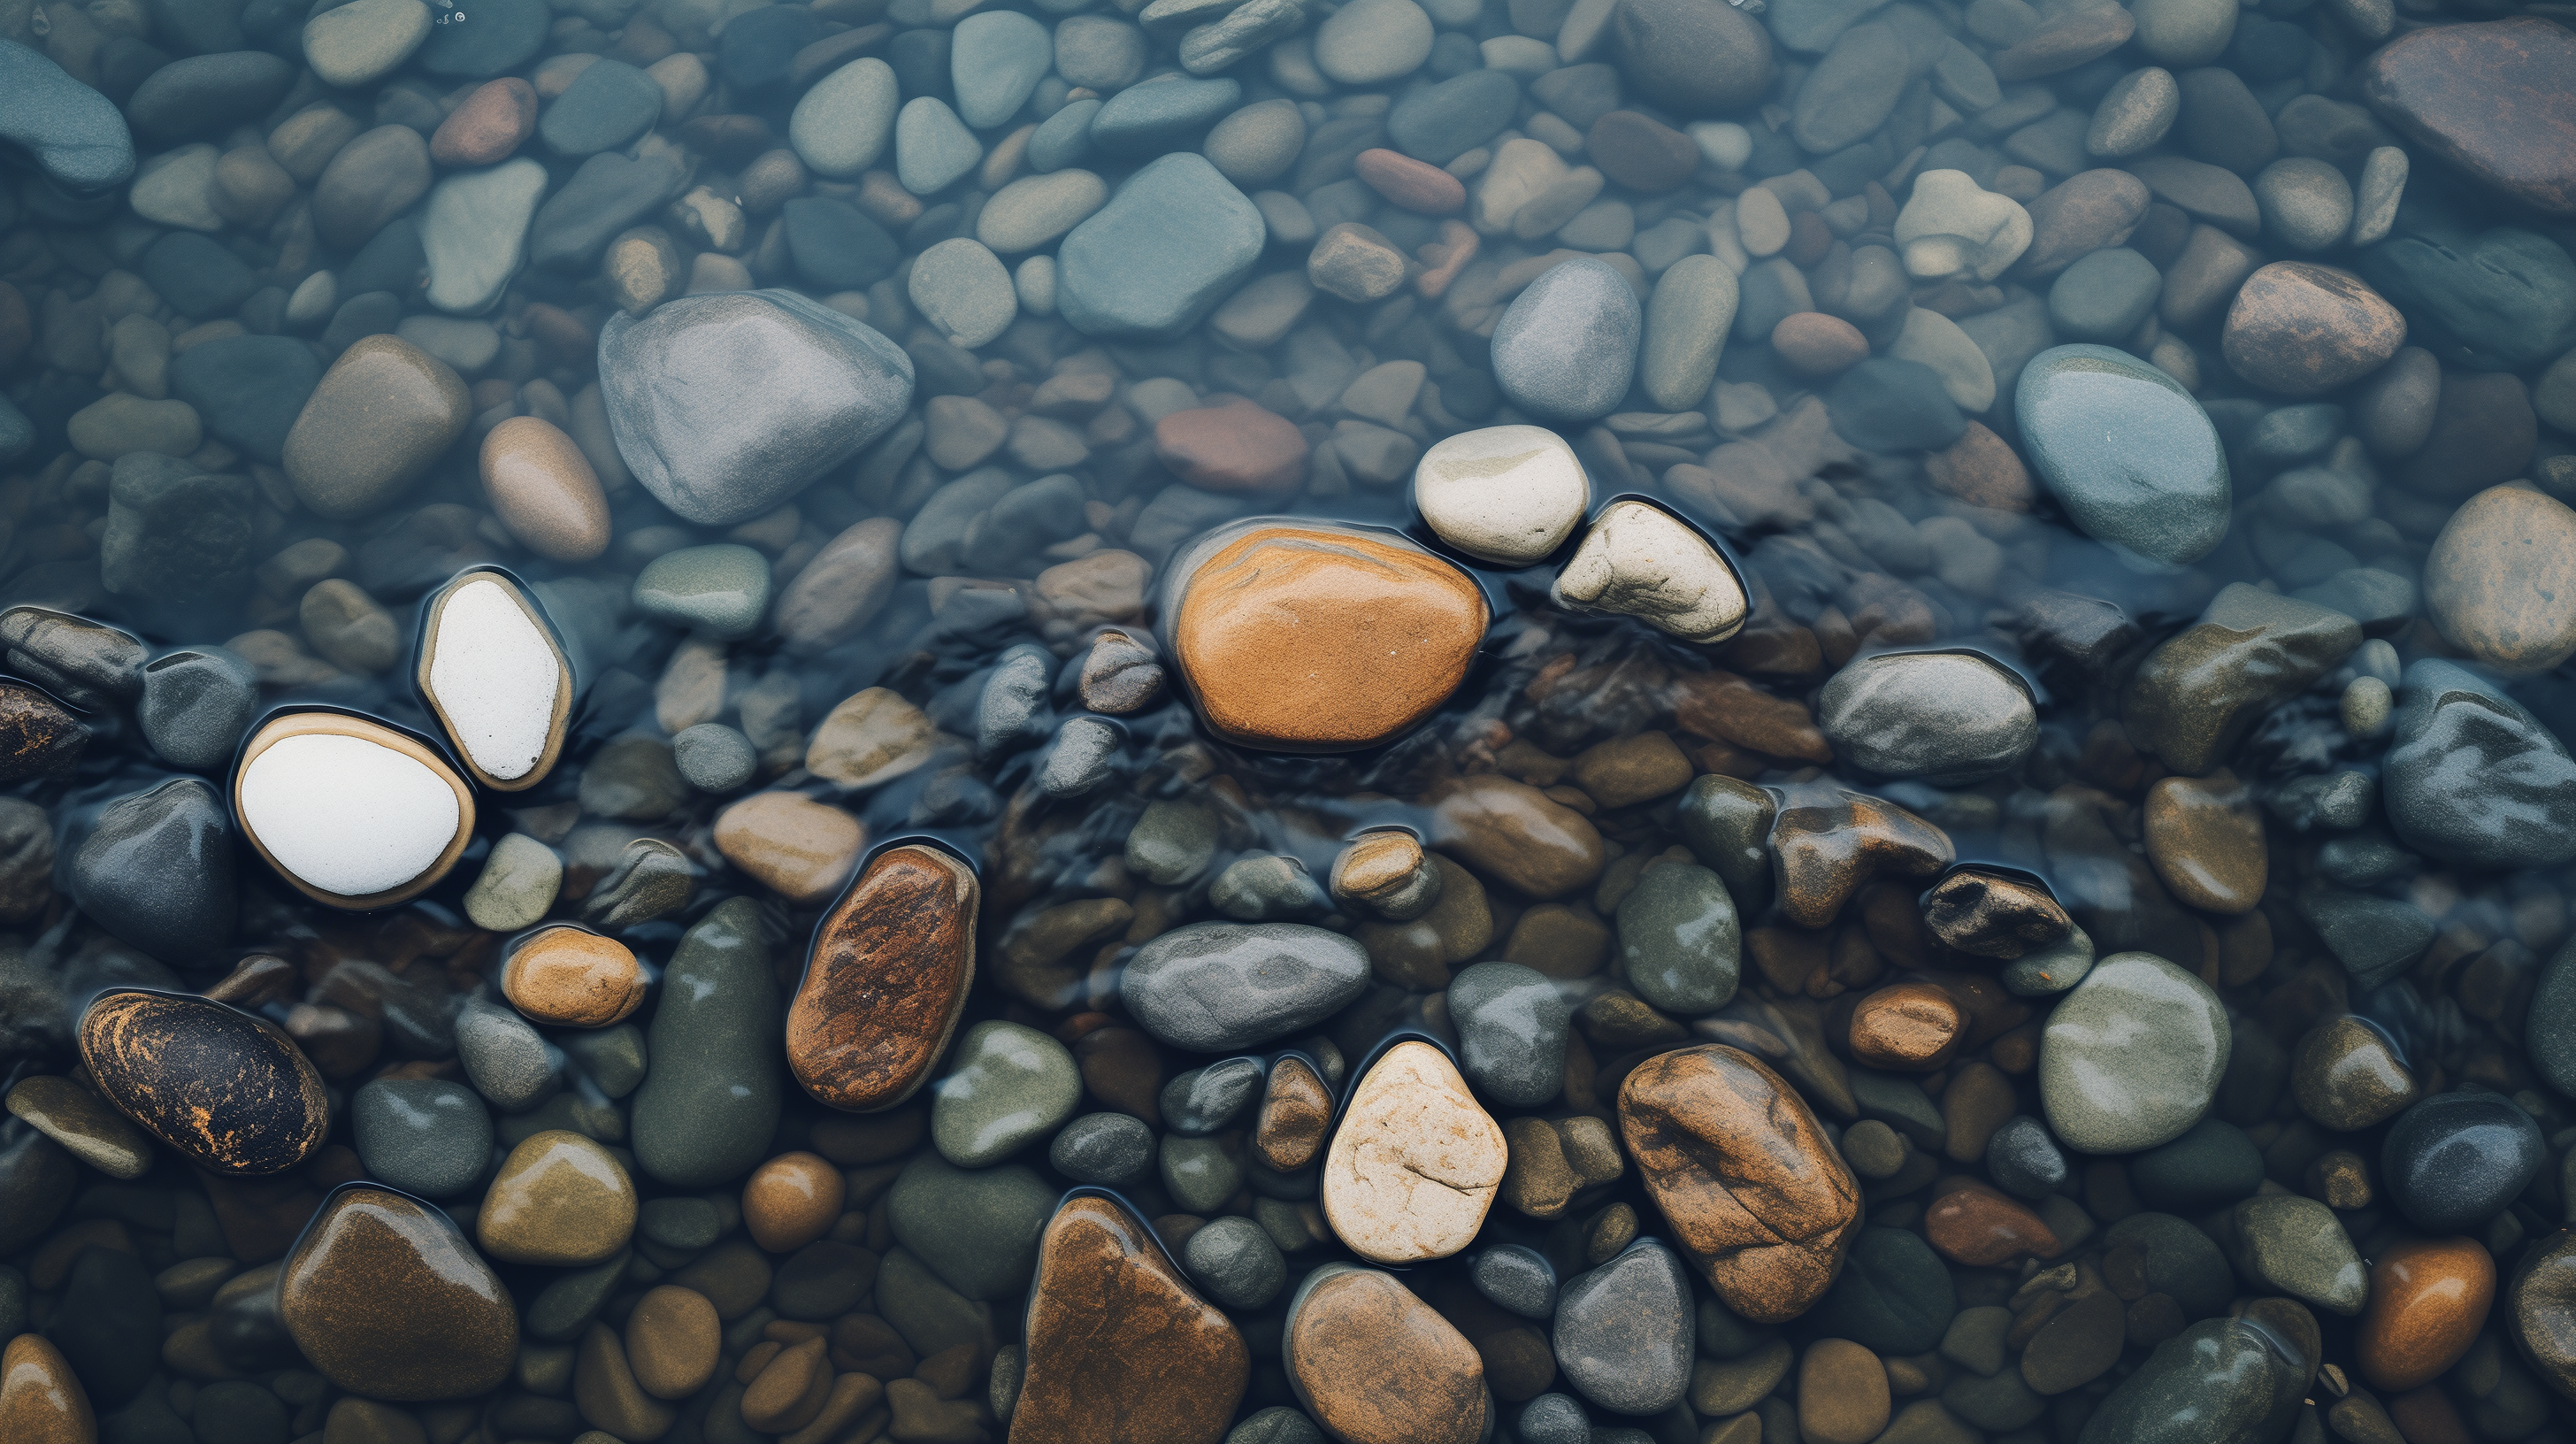 HD wallpaper of smooth stone pebbles submerged in clear water, creating a serene desktop background with a natural pebble texture.